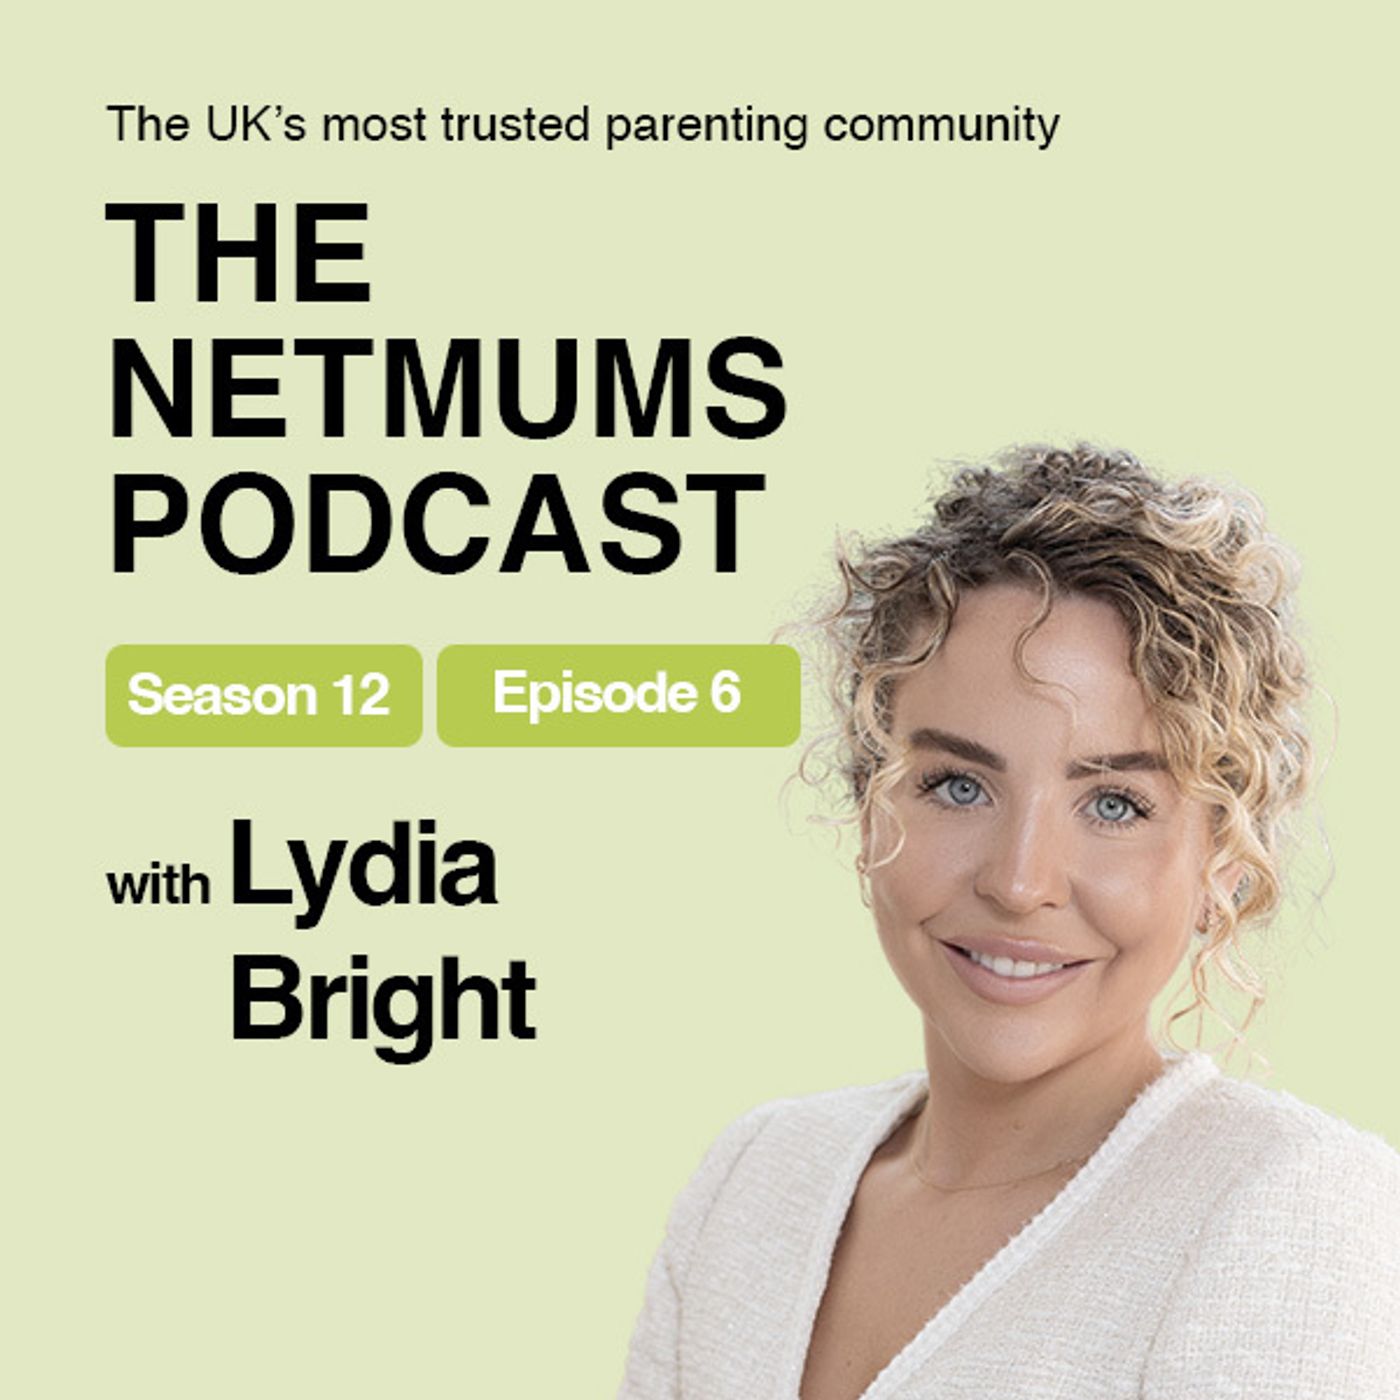 S12 Ep6: Solo parenting, reality TV, and writing for kids with Lydia Bright